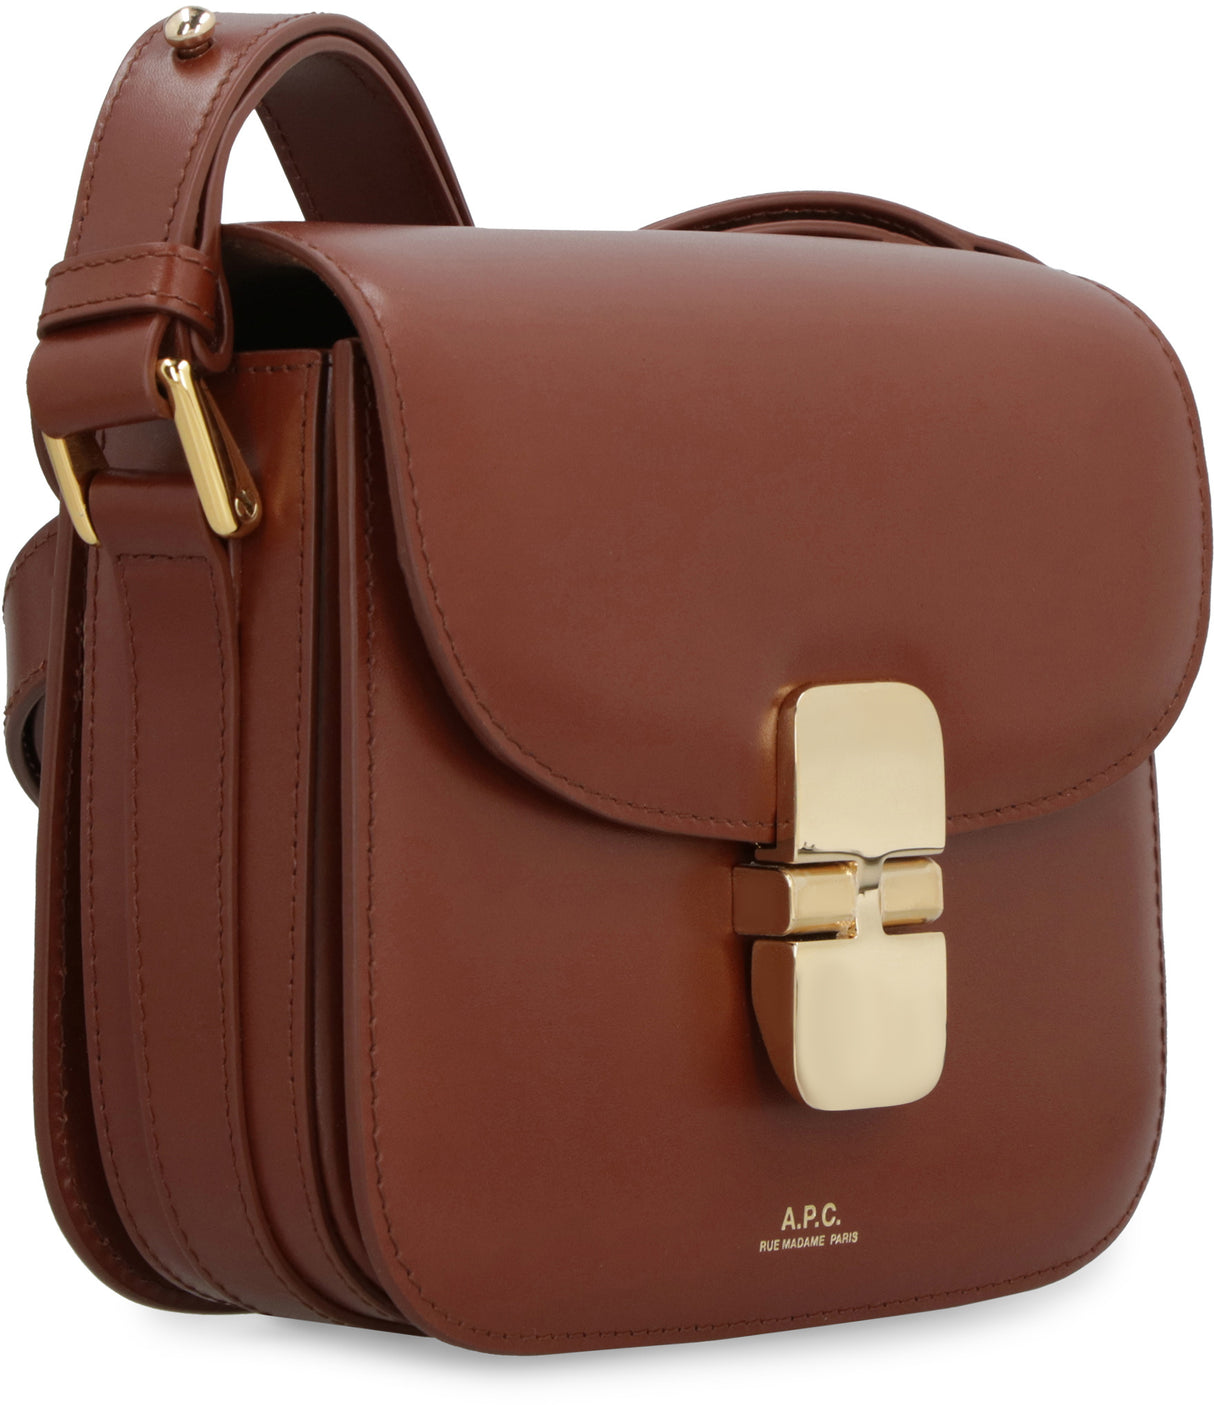 A.P.C. Grace Mini Brown Leather Crossbody Bag with Gold-Tone Accents